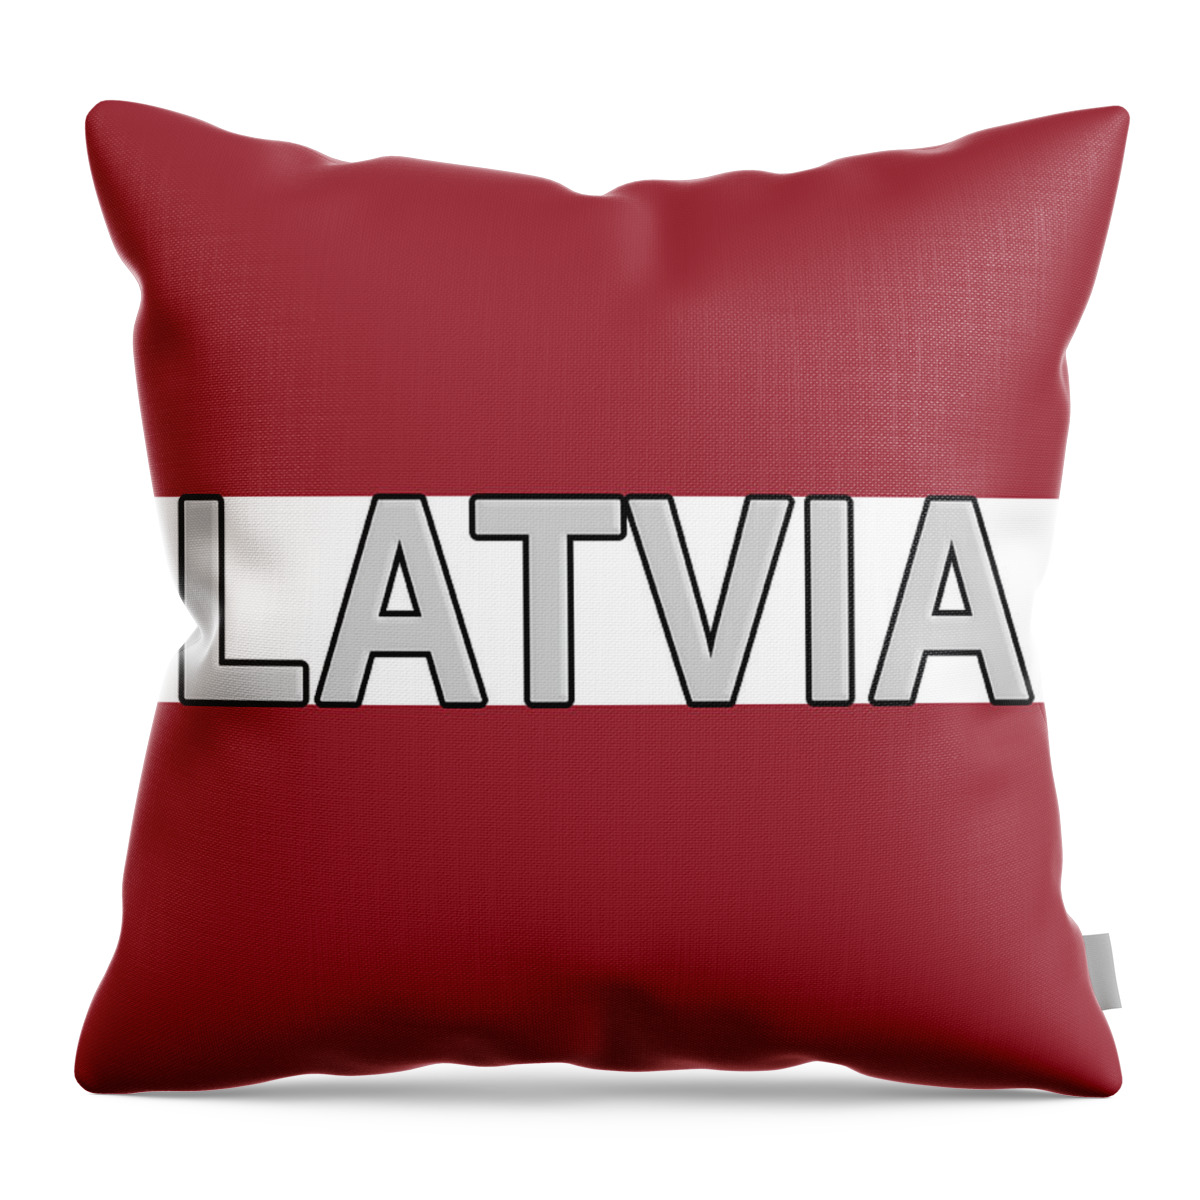 Europe Throw Pillow featuring the digital art Flag of Latvia Word by Roy Pedersen